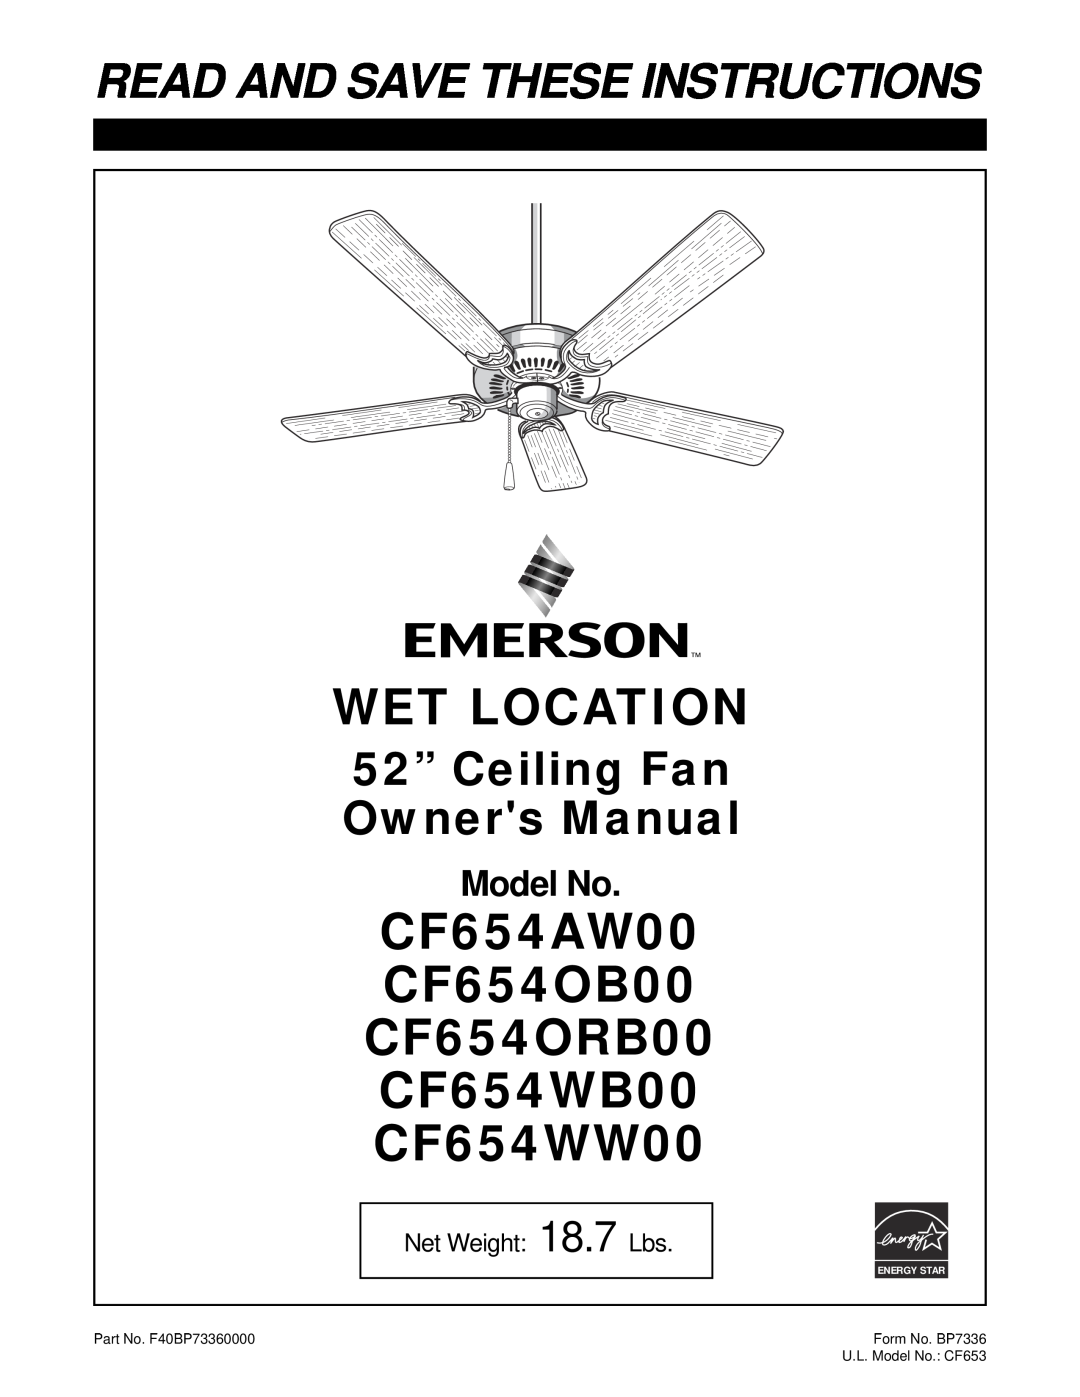 Emerson owner manual Sea Breeze, CF654AW00 CF654ORB00 CF654WB00 CF654WW00, Read And Save These Instructions, Model No 